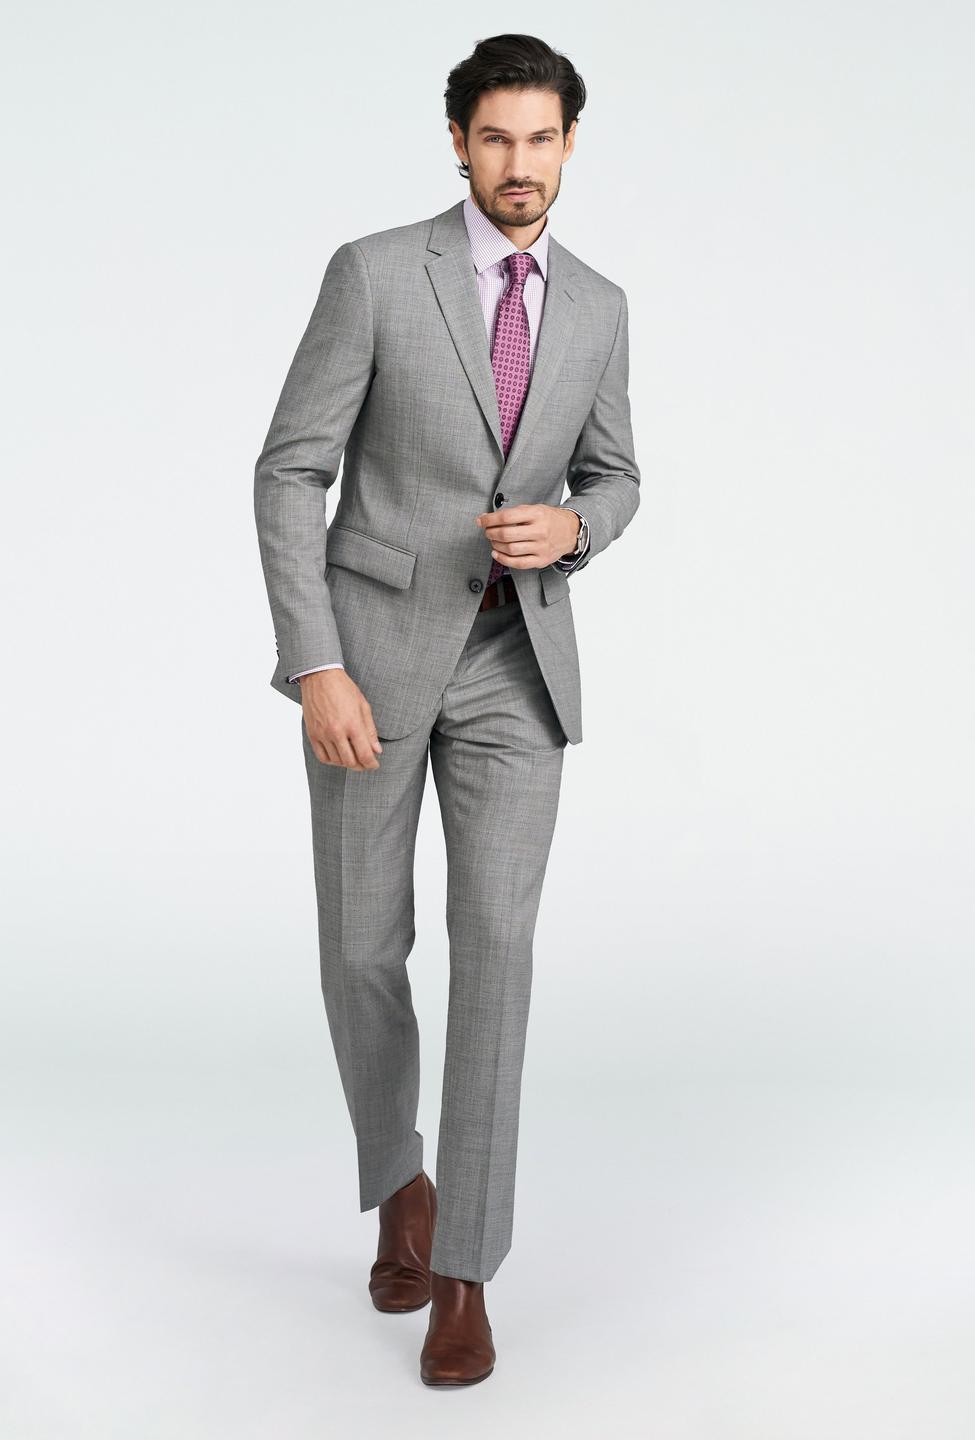 What To Wear With A Gray Suit | lupon.gov.ph